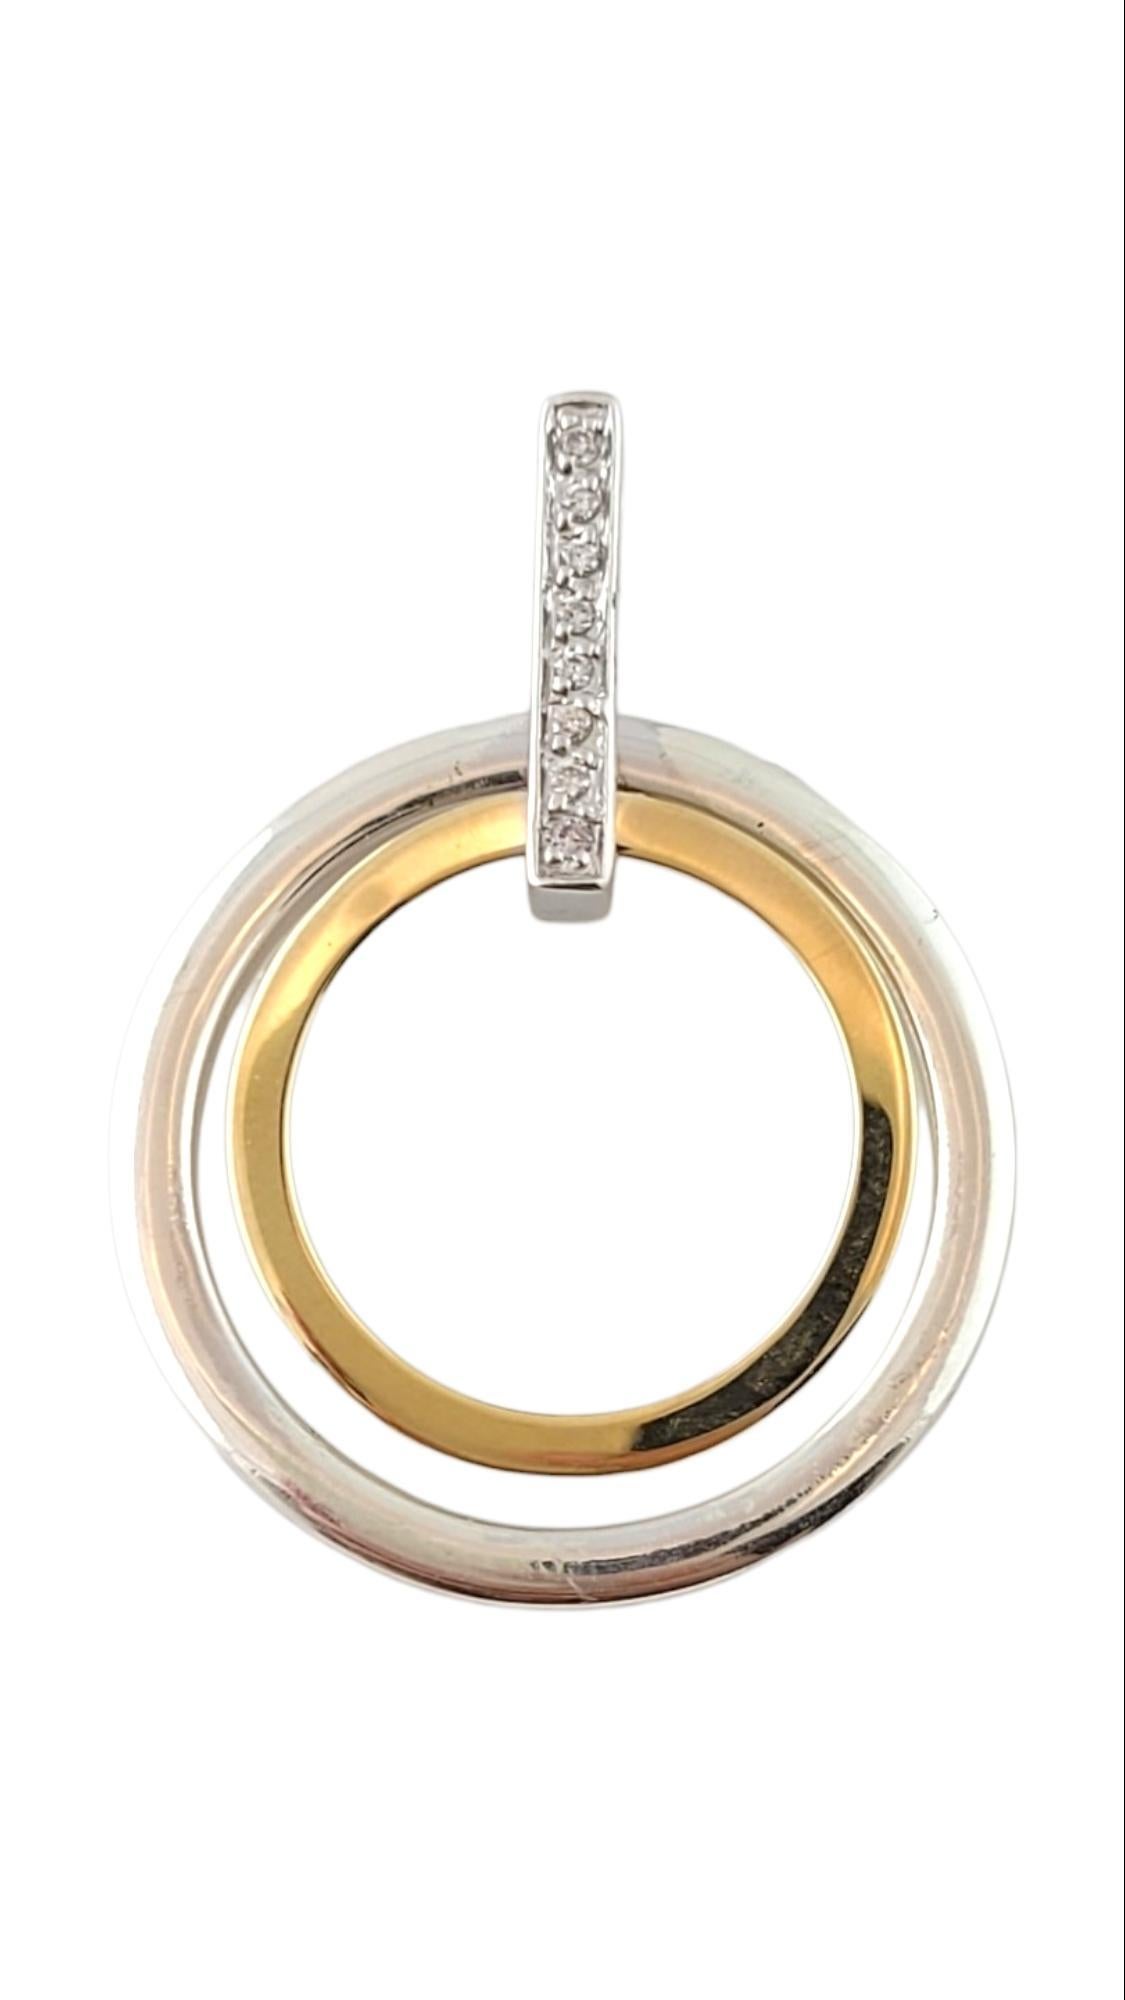 Vintage 14K Yellow Gold & Sterling Silver Diamond Pendant

This gorgeous pendant is crafted from 14K yellow gold as well as 925 sterling silver and features 8 sparkling round brilliant cut diamonds!

Approximate total diamond weight: .08